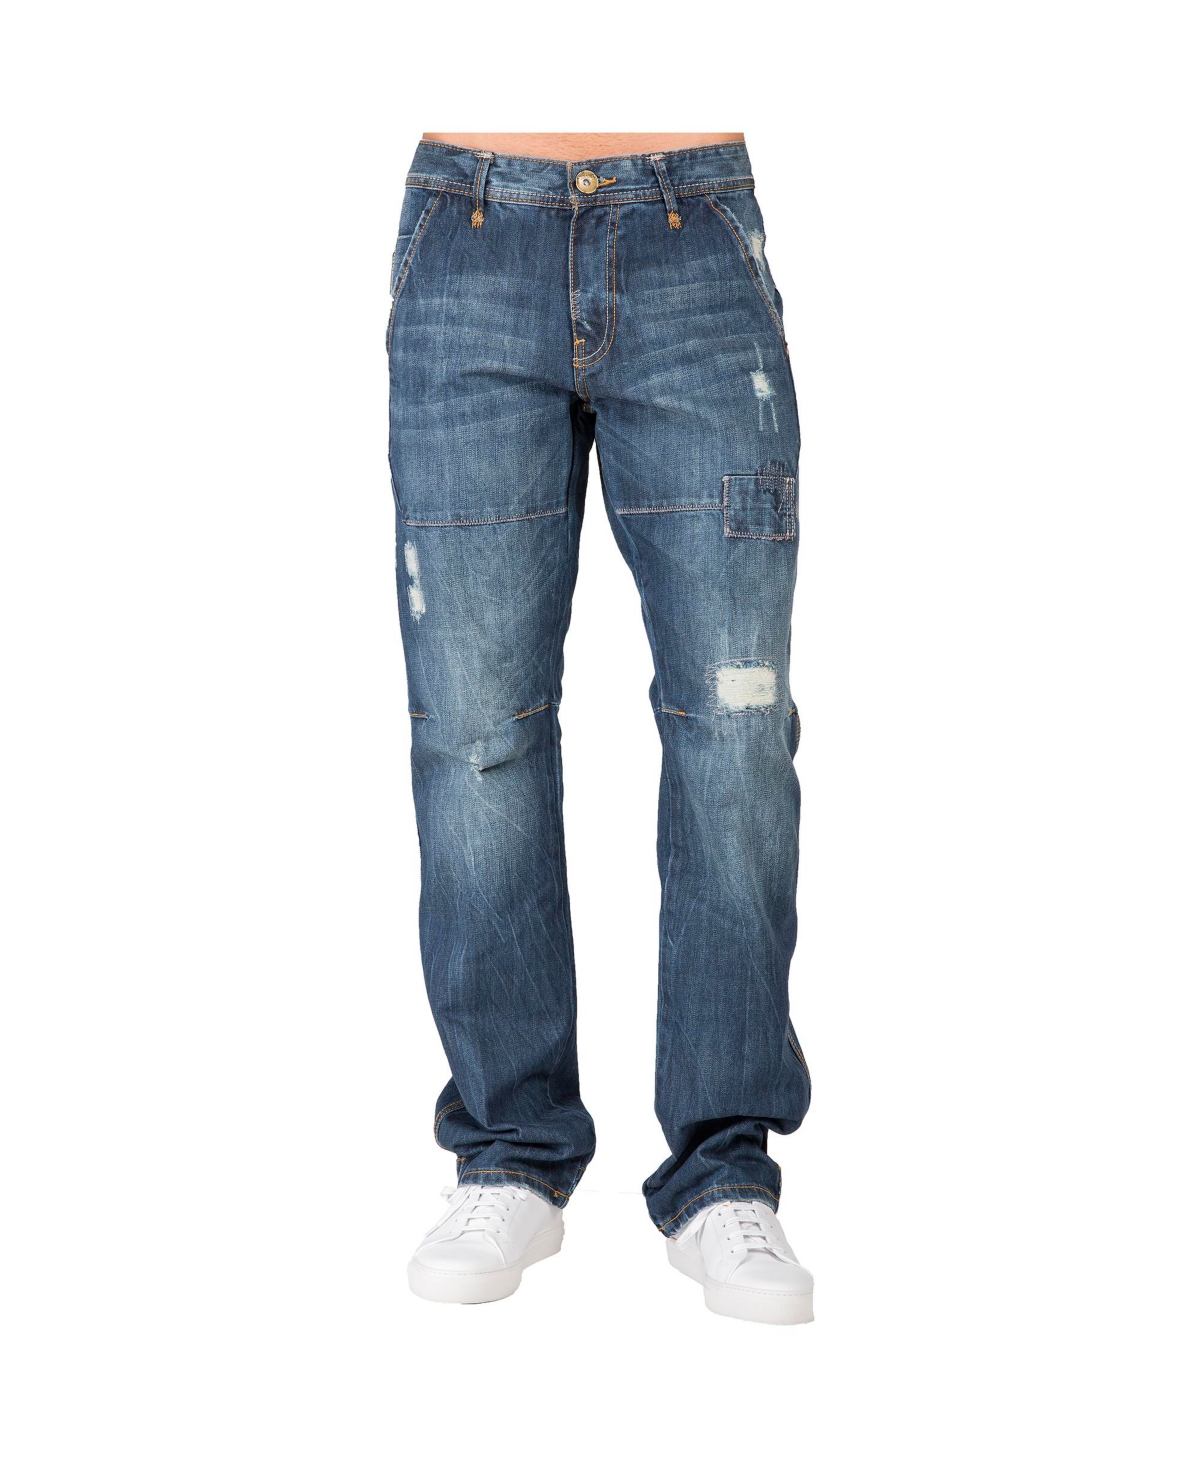 Men's Relaxed Straight Premium Jeans Vintage-like Whisker Ripped & Repaired - Blue collar